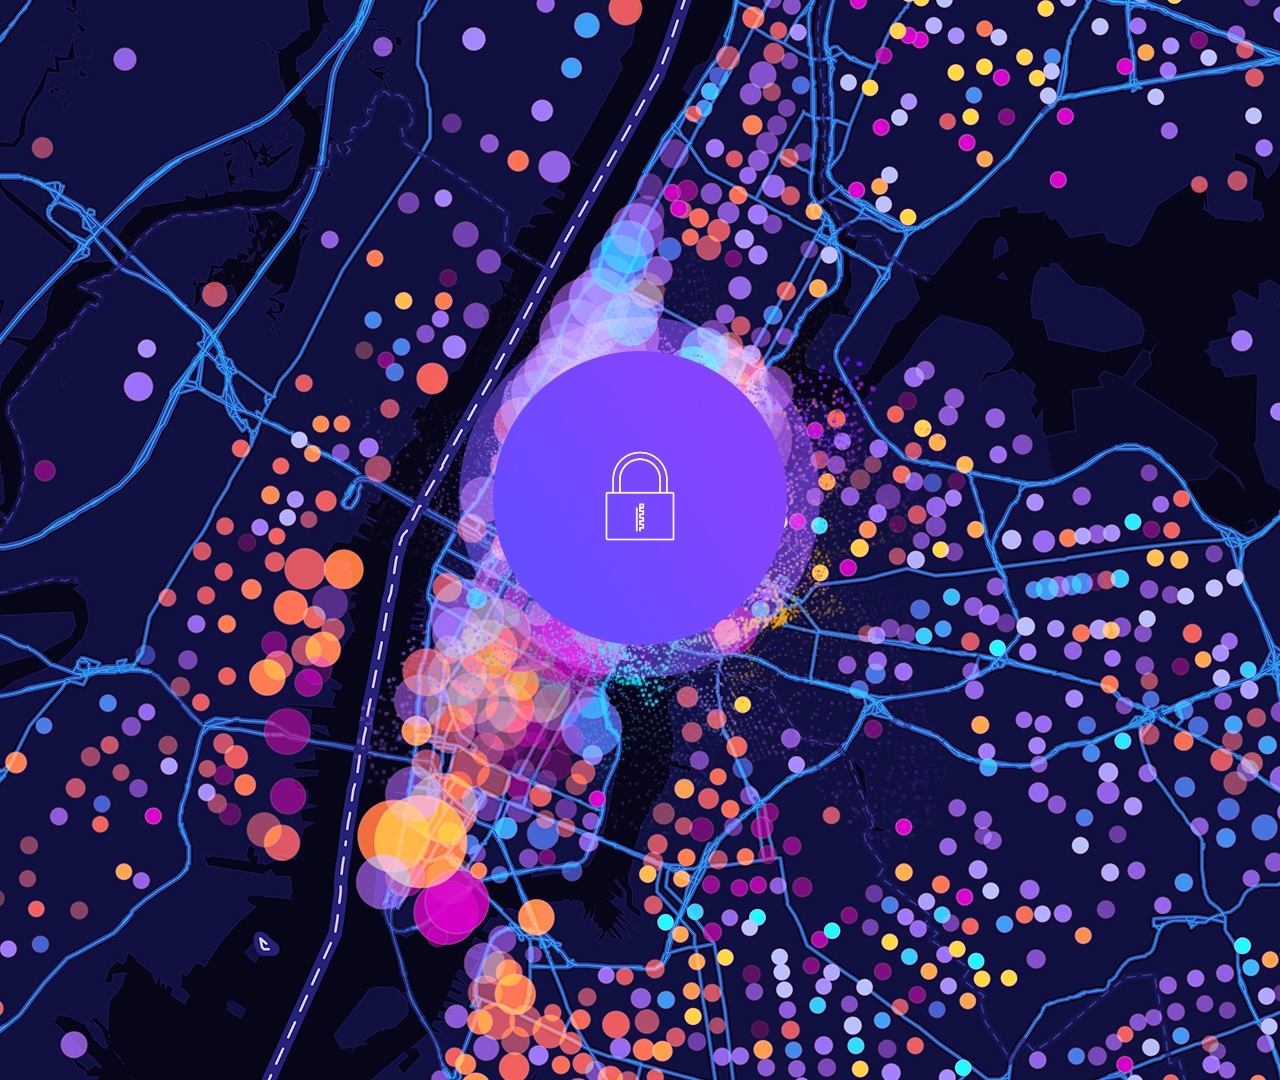 An icon of a lock and a digital street map with purple, yellow, and pink circular data points